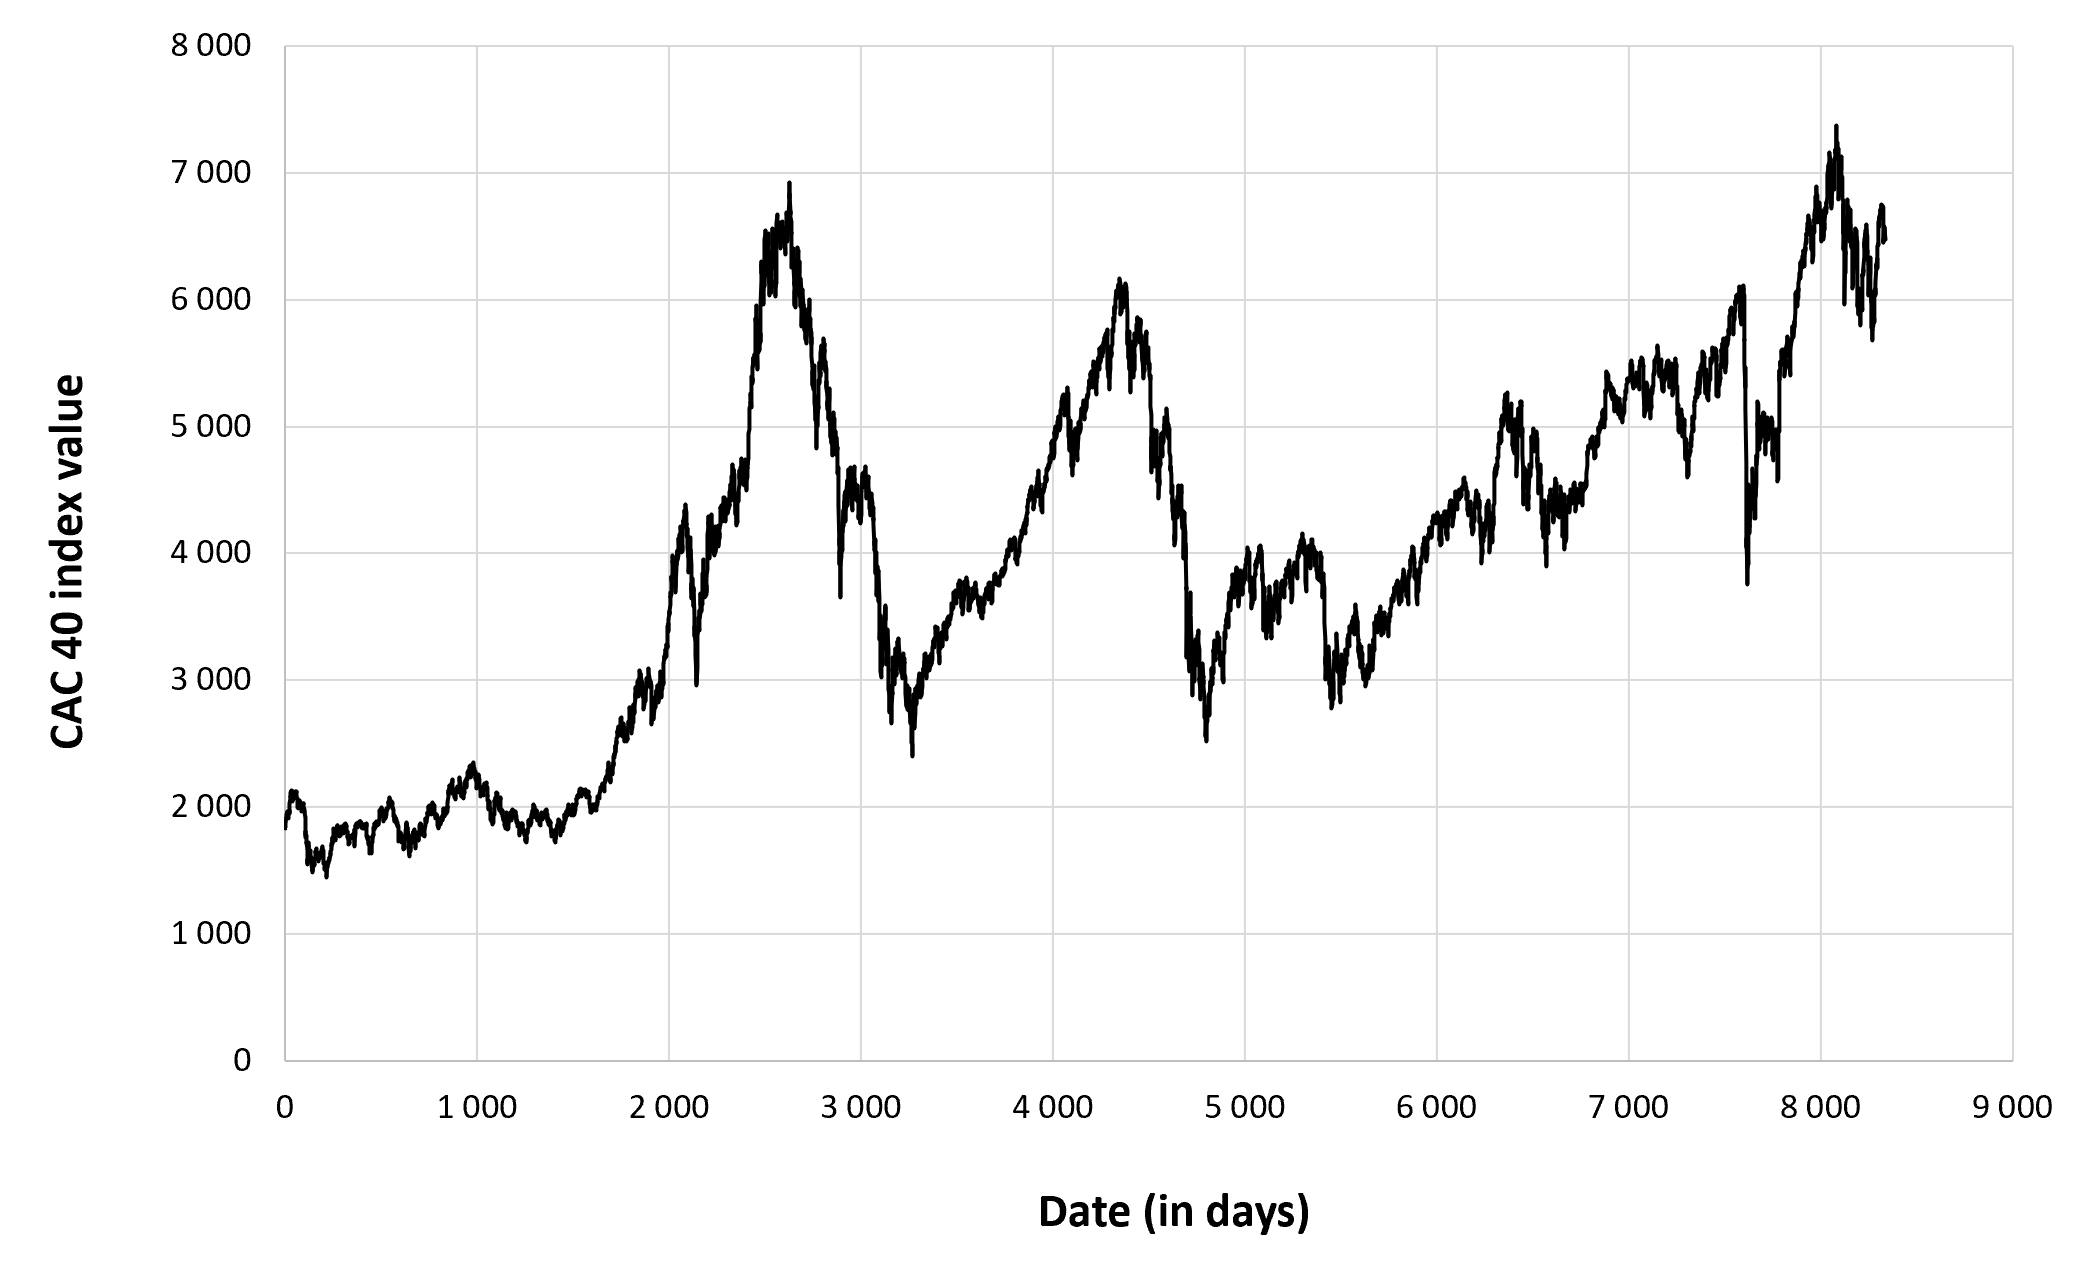 Evolution of the CAC 40 index